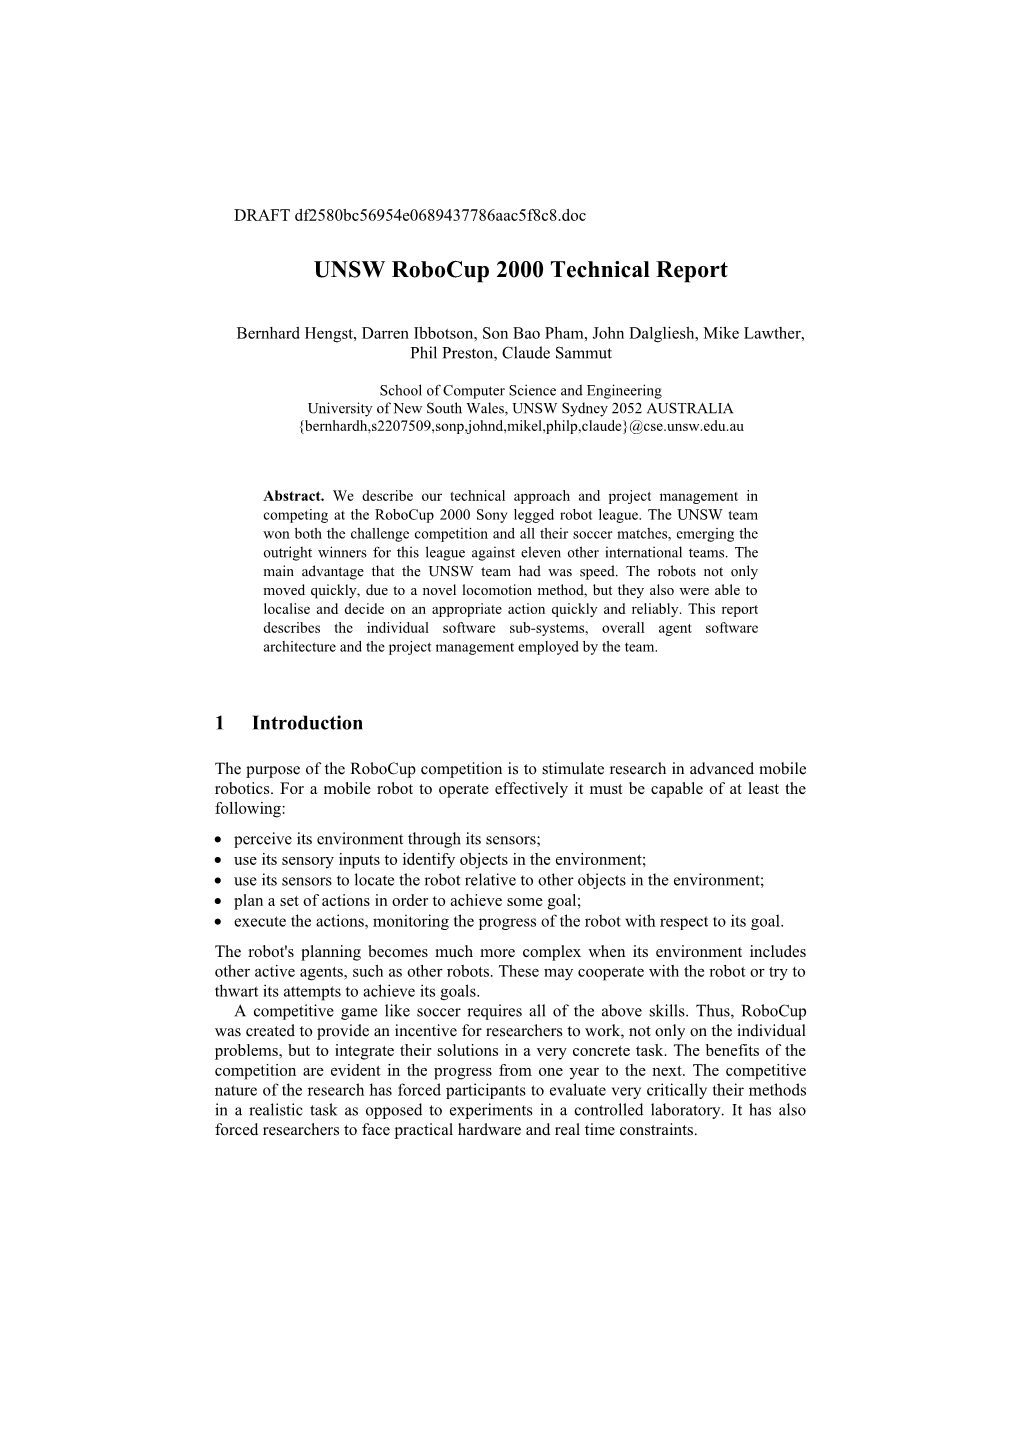 UNSW Robocup 2000 Technical Report